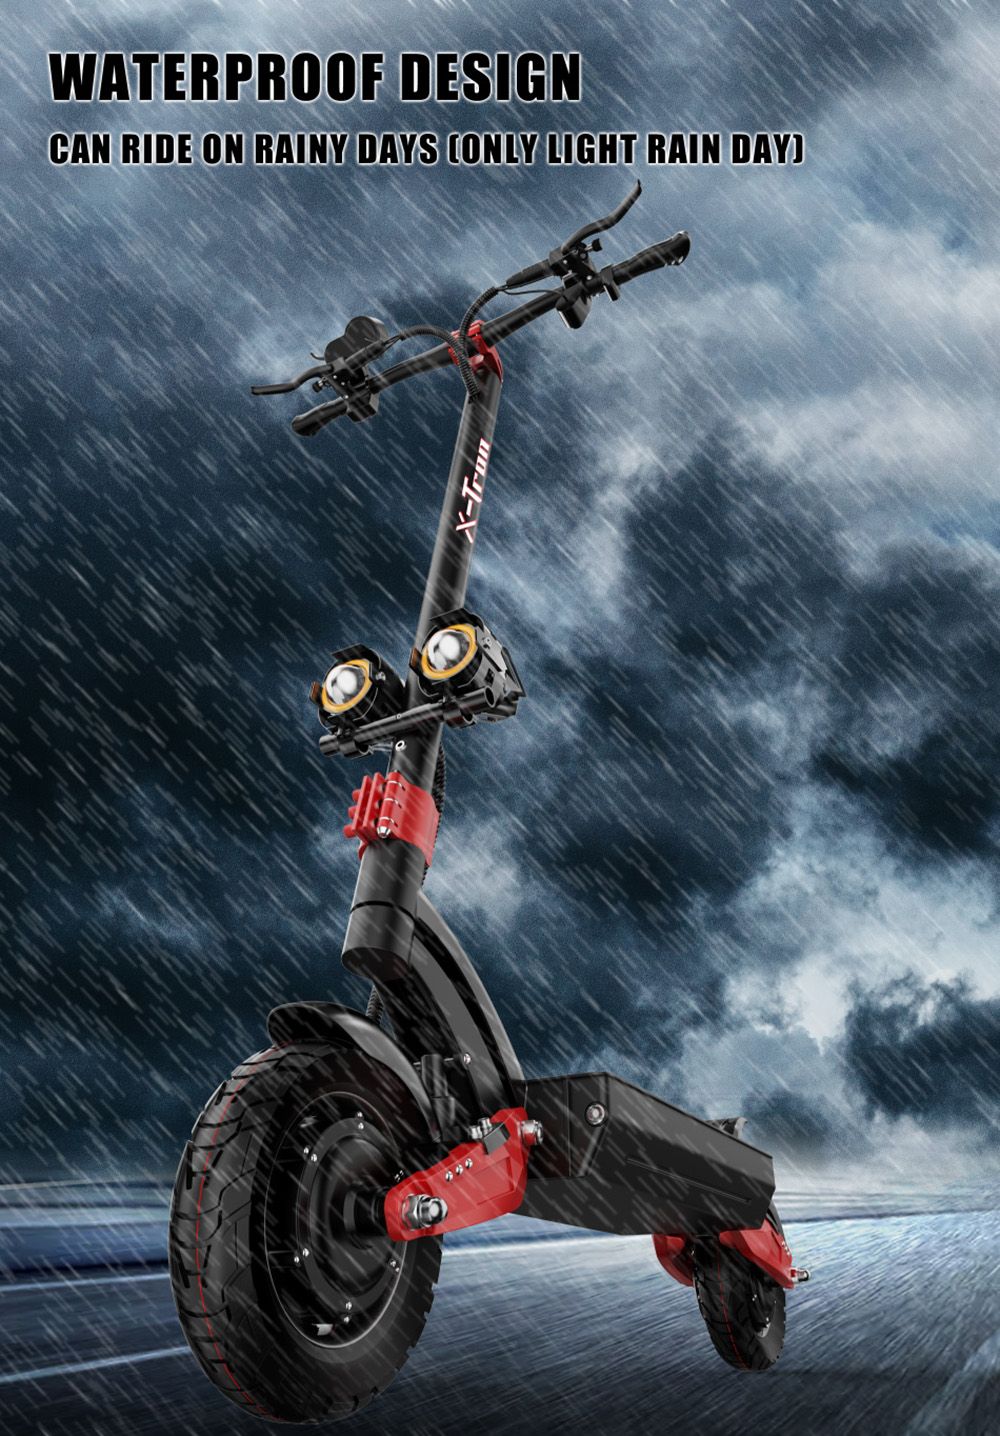 X-Tron X10 Pro 10'' Folding Off-Road Electric Scooter 1600W *2 Motor 60V 20.8Ah Battery Max speed 65-70km/h Max load 150KG - Red